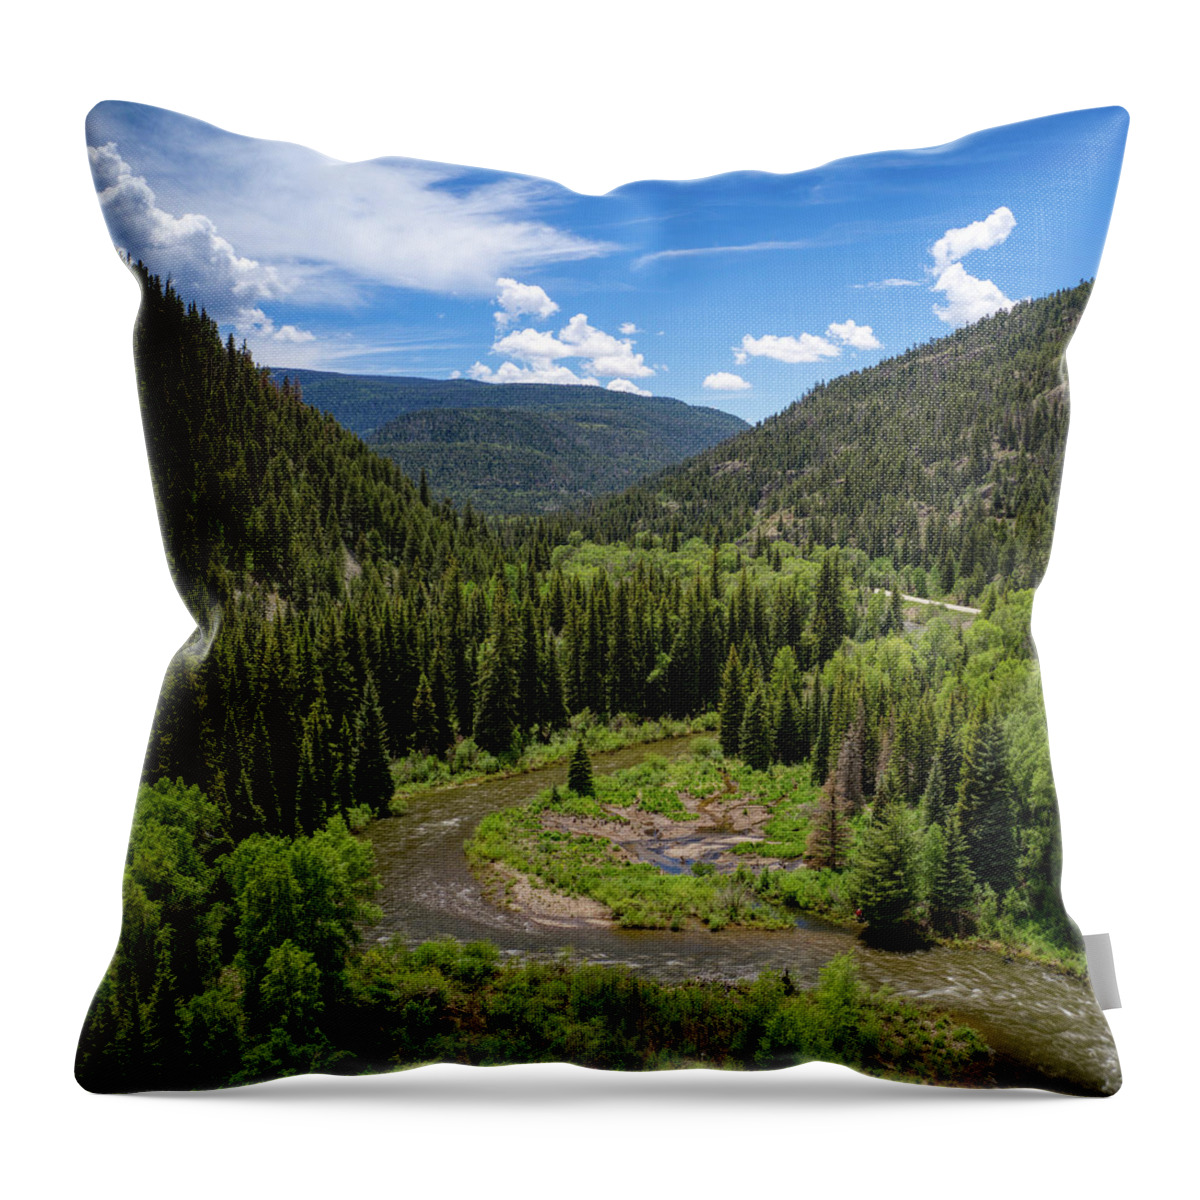 Sunsets Throw Pillow featuring the photograph South Fork Rio Grande Colorado by Anthony Giammarino